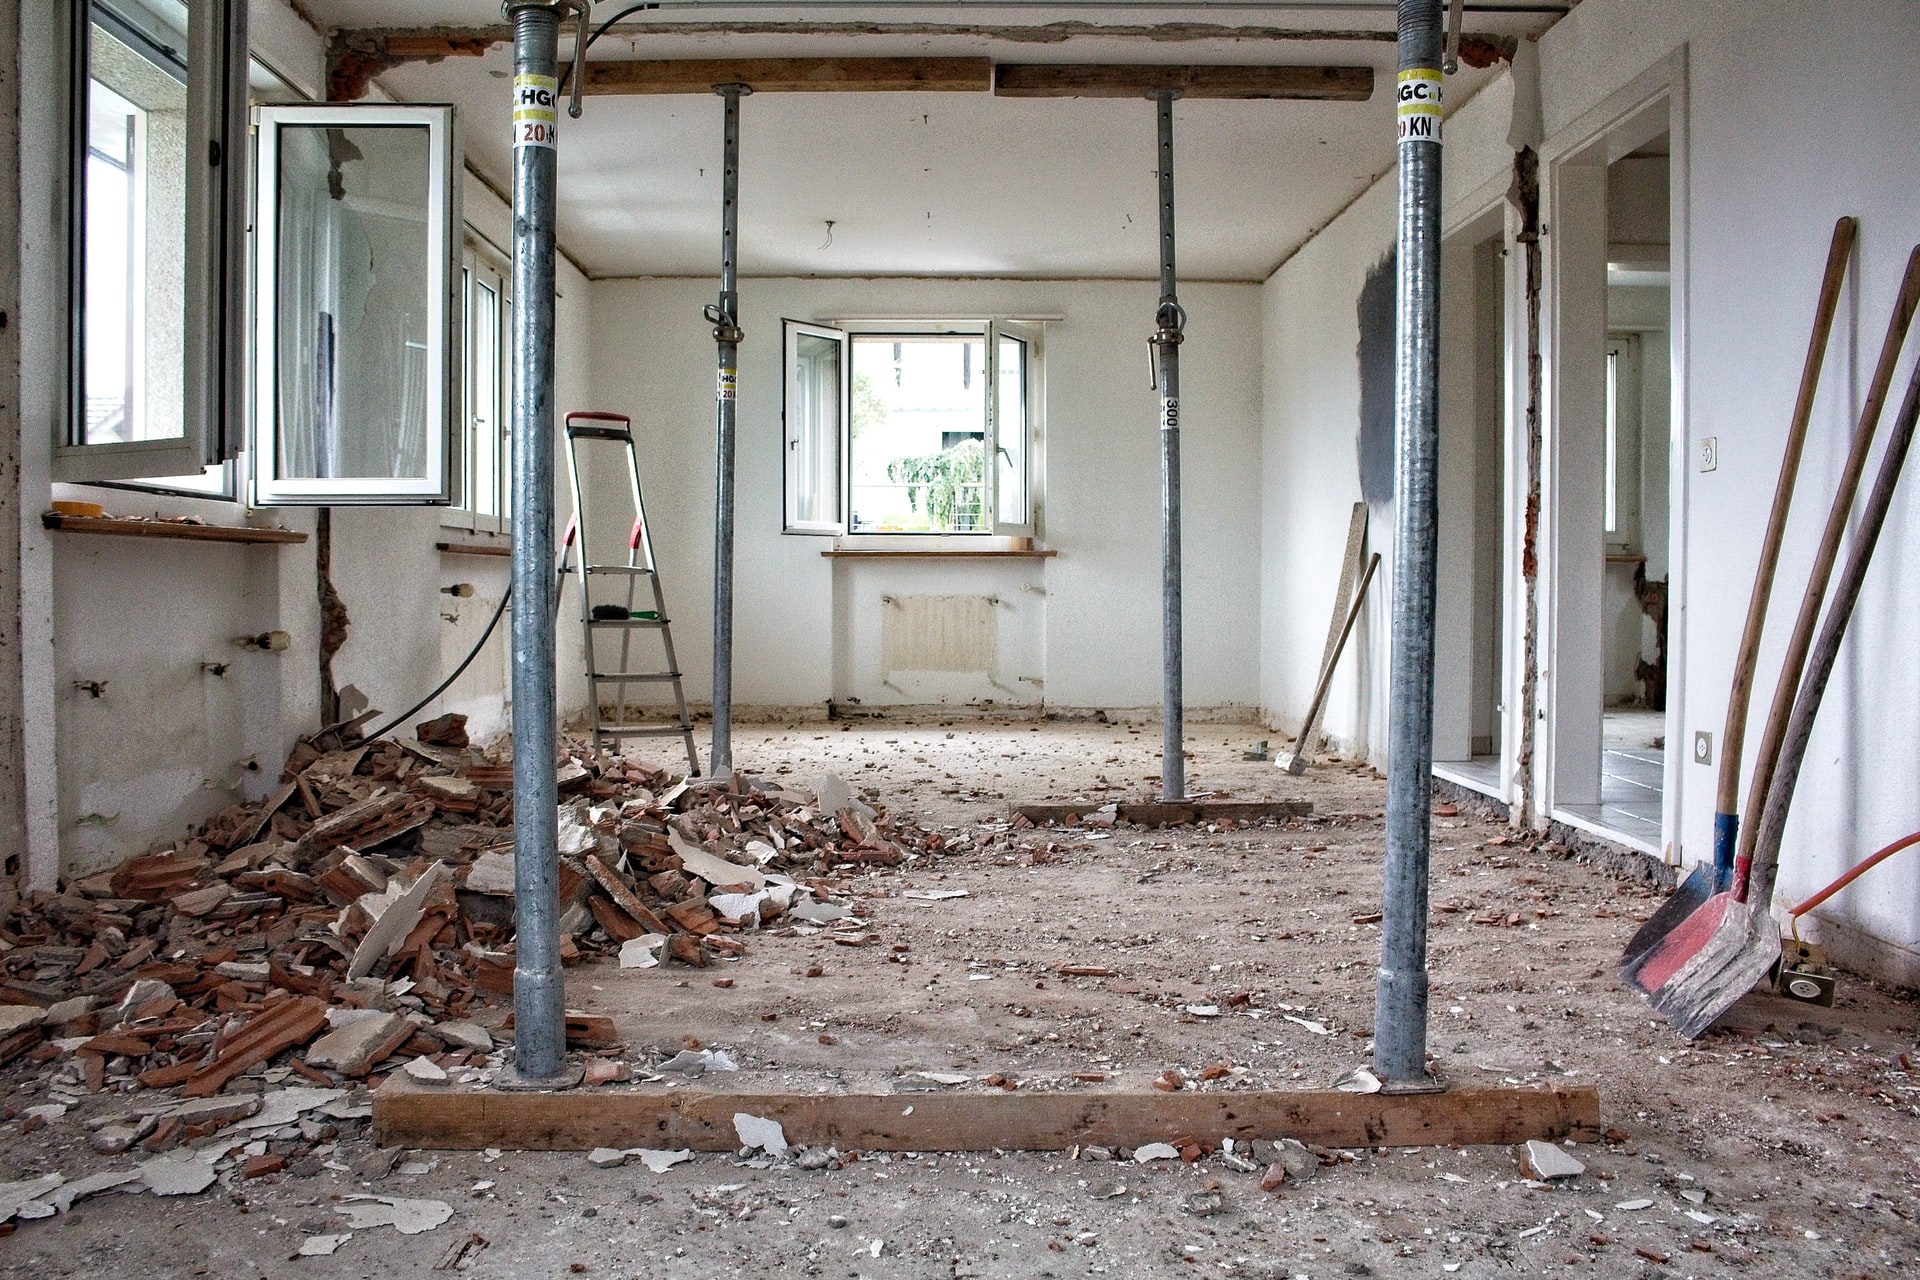 Demolition Interior House Home Show Wood Stock Photo 1097211647 |  Shutterstock